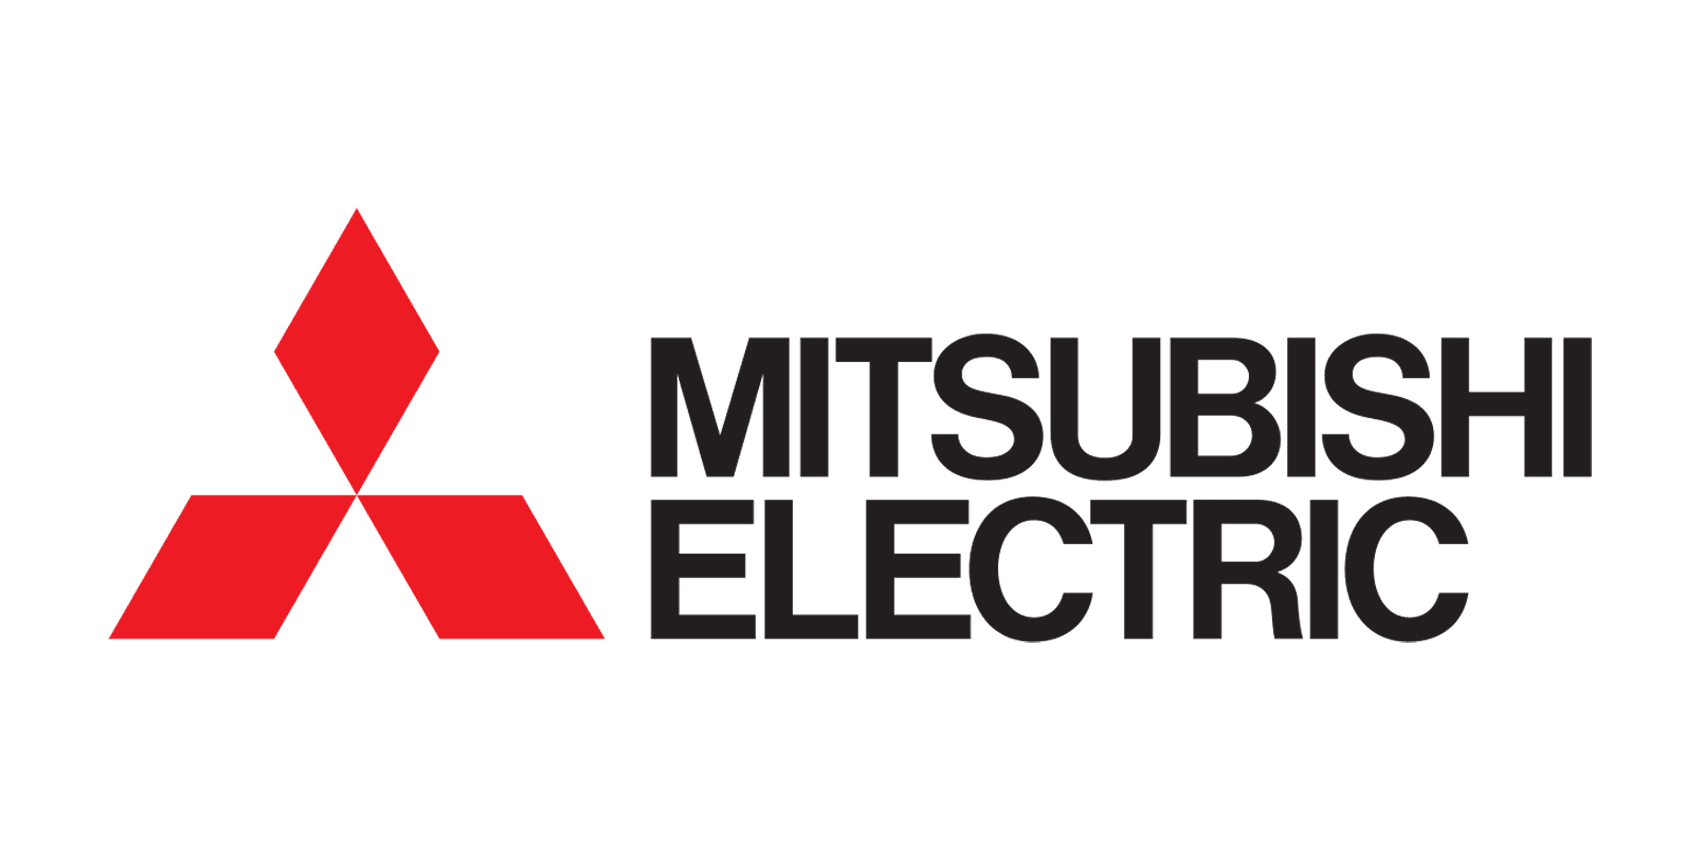 https://www.indyphc.com/wp-content/uploads/Mitsubishi-2x1-1.png